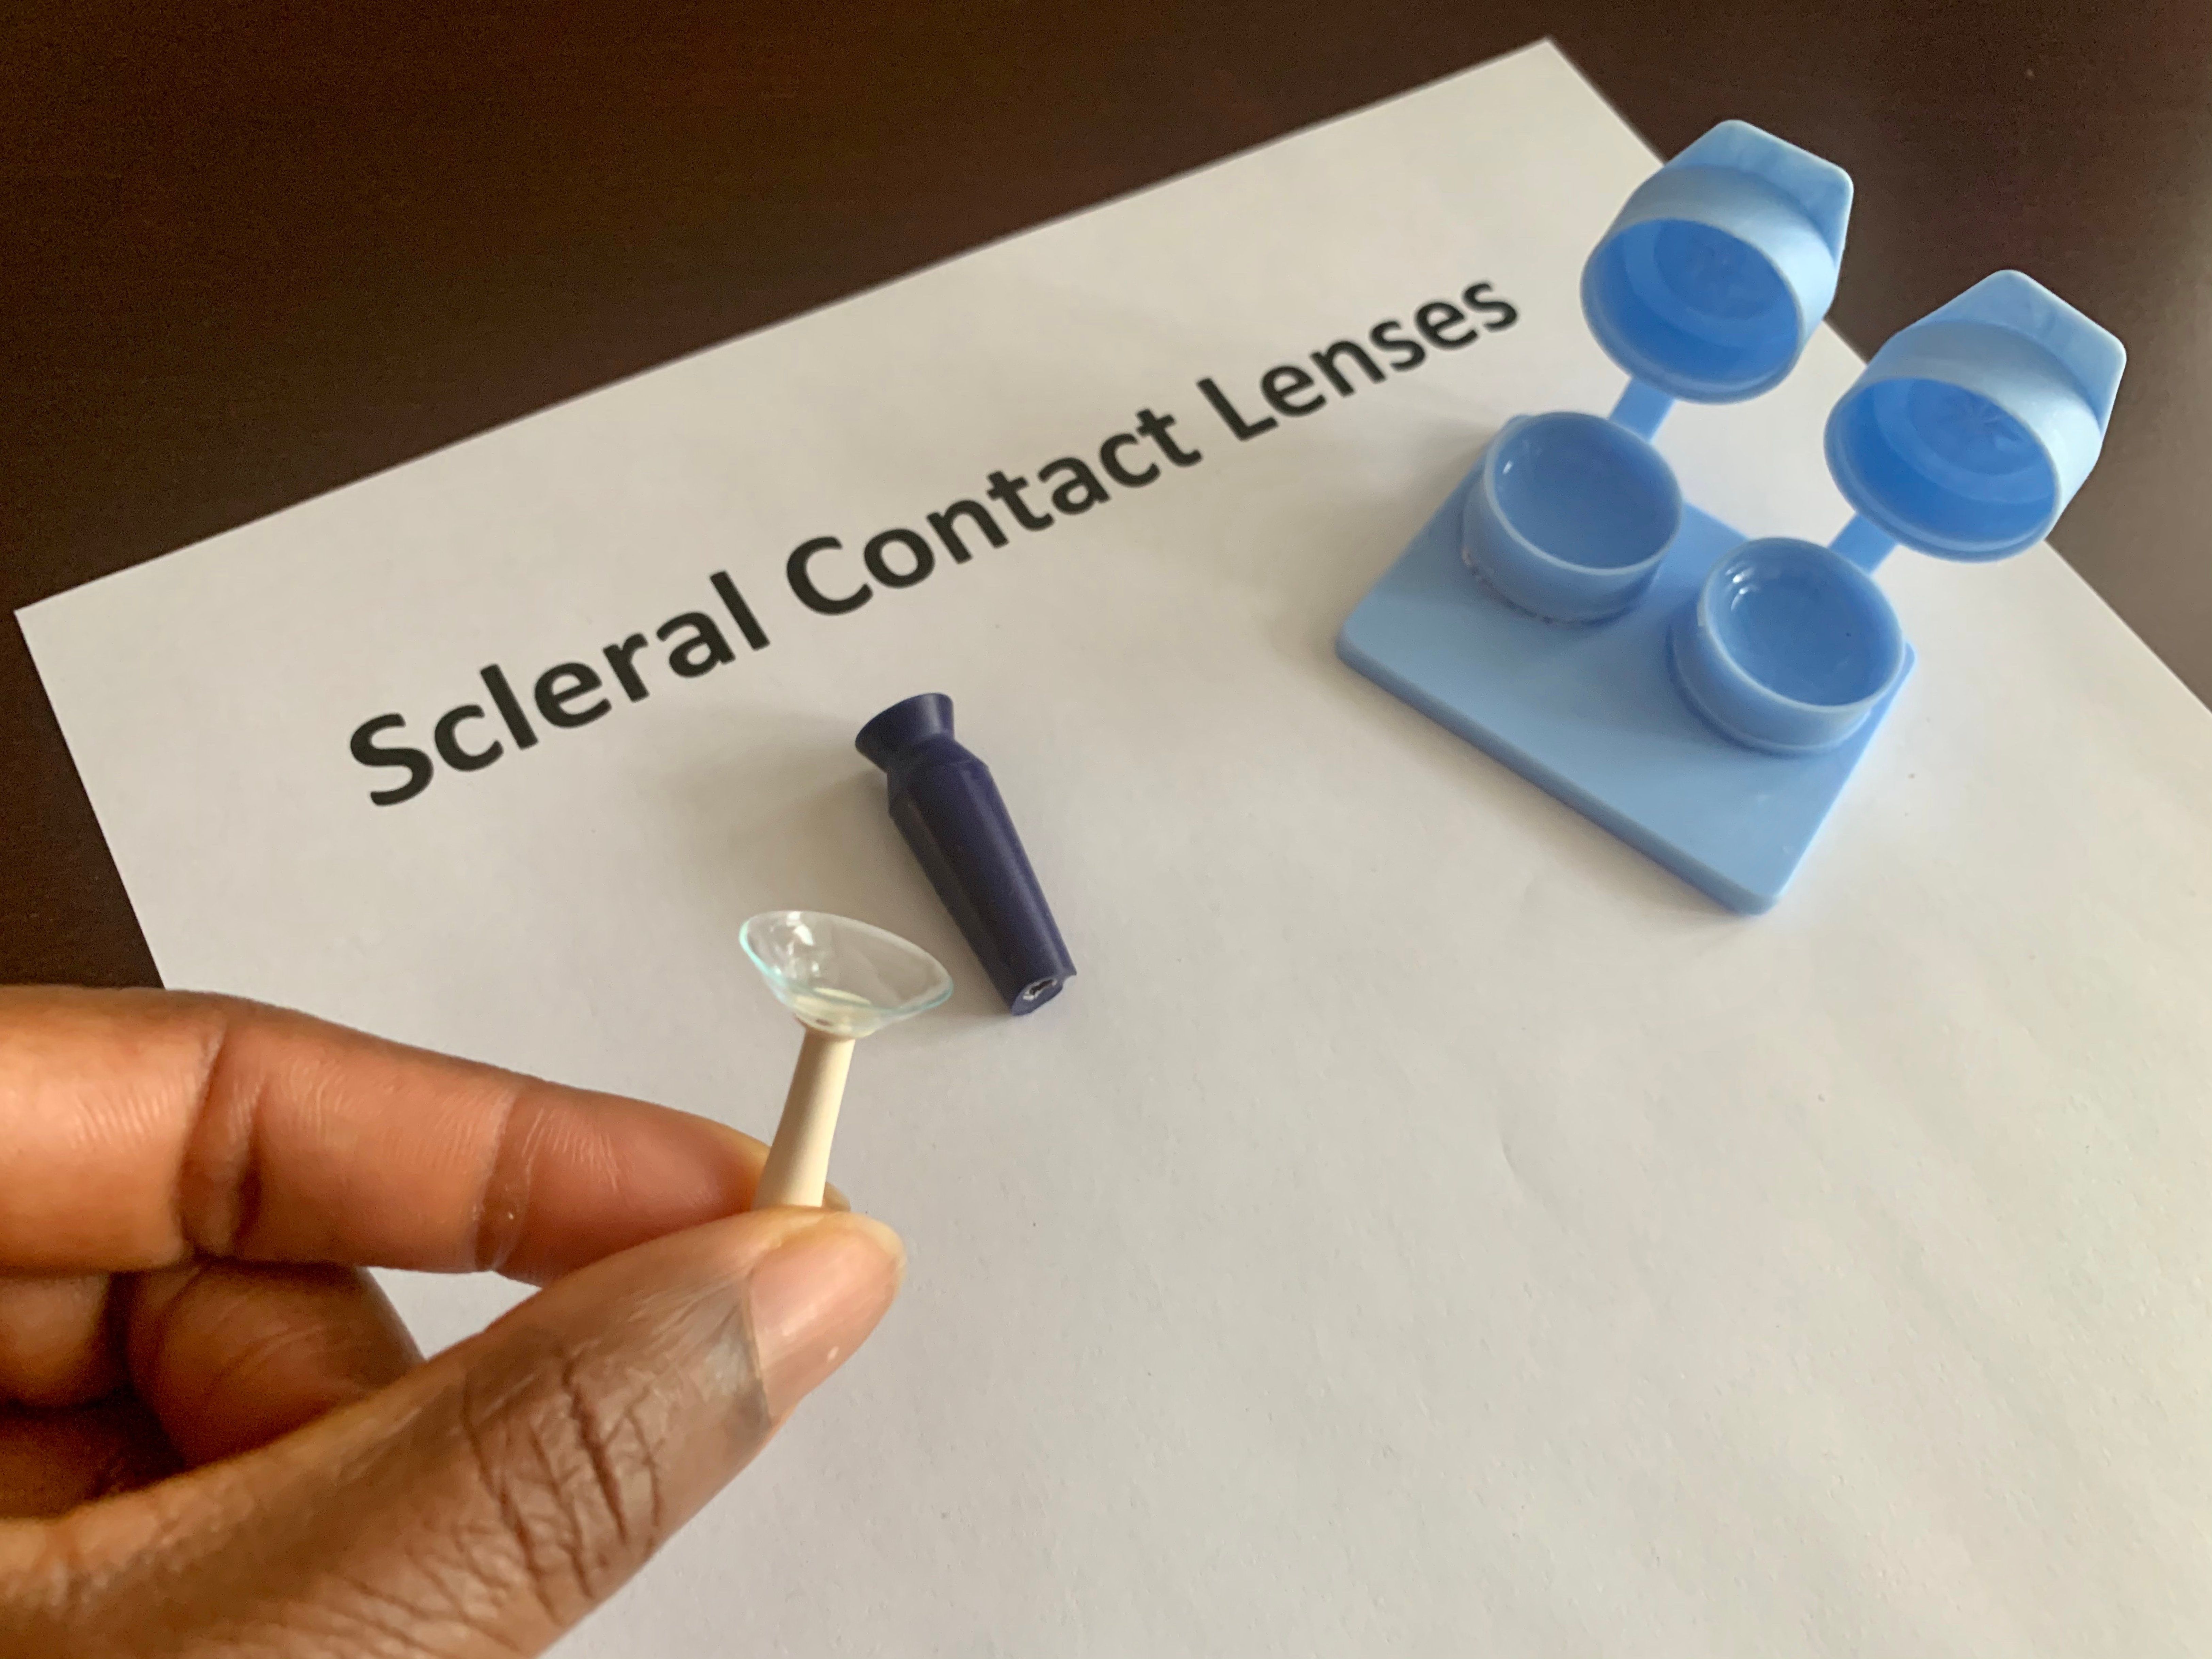 Do Scleral Contact Lenses Work for Dry Eye?